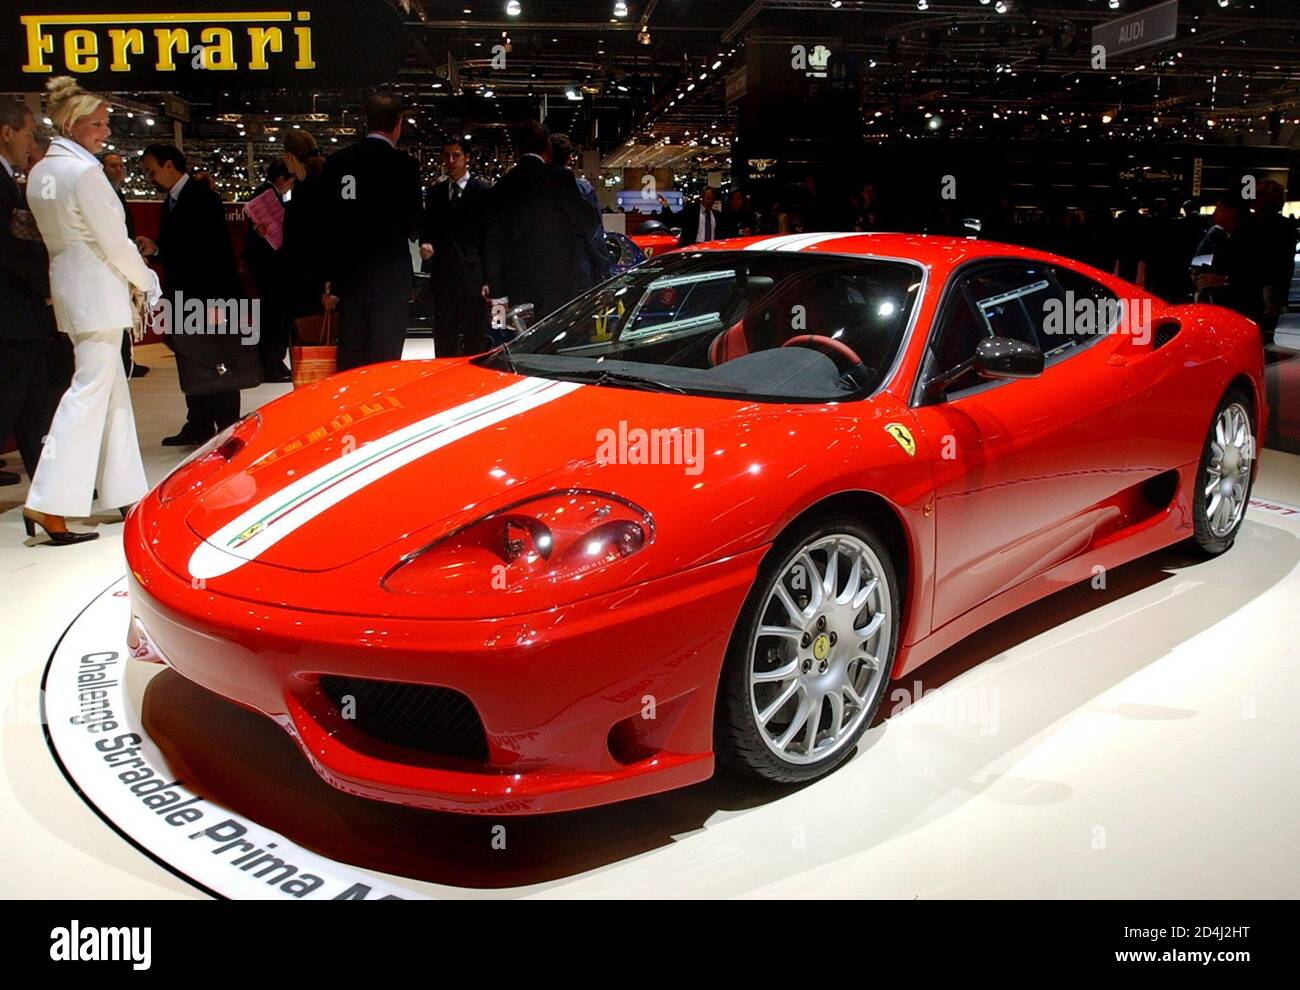 The new Ferrari 360 Challenge Stradale is seen on display as a first world  presentation at the Geneva car show in Geneva, Switzerland, March 4, 2003.  The car comes equipped with a